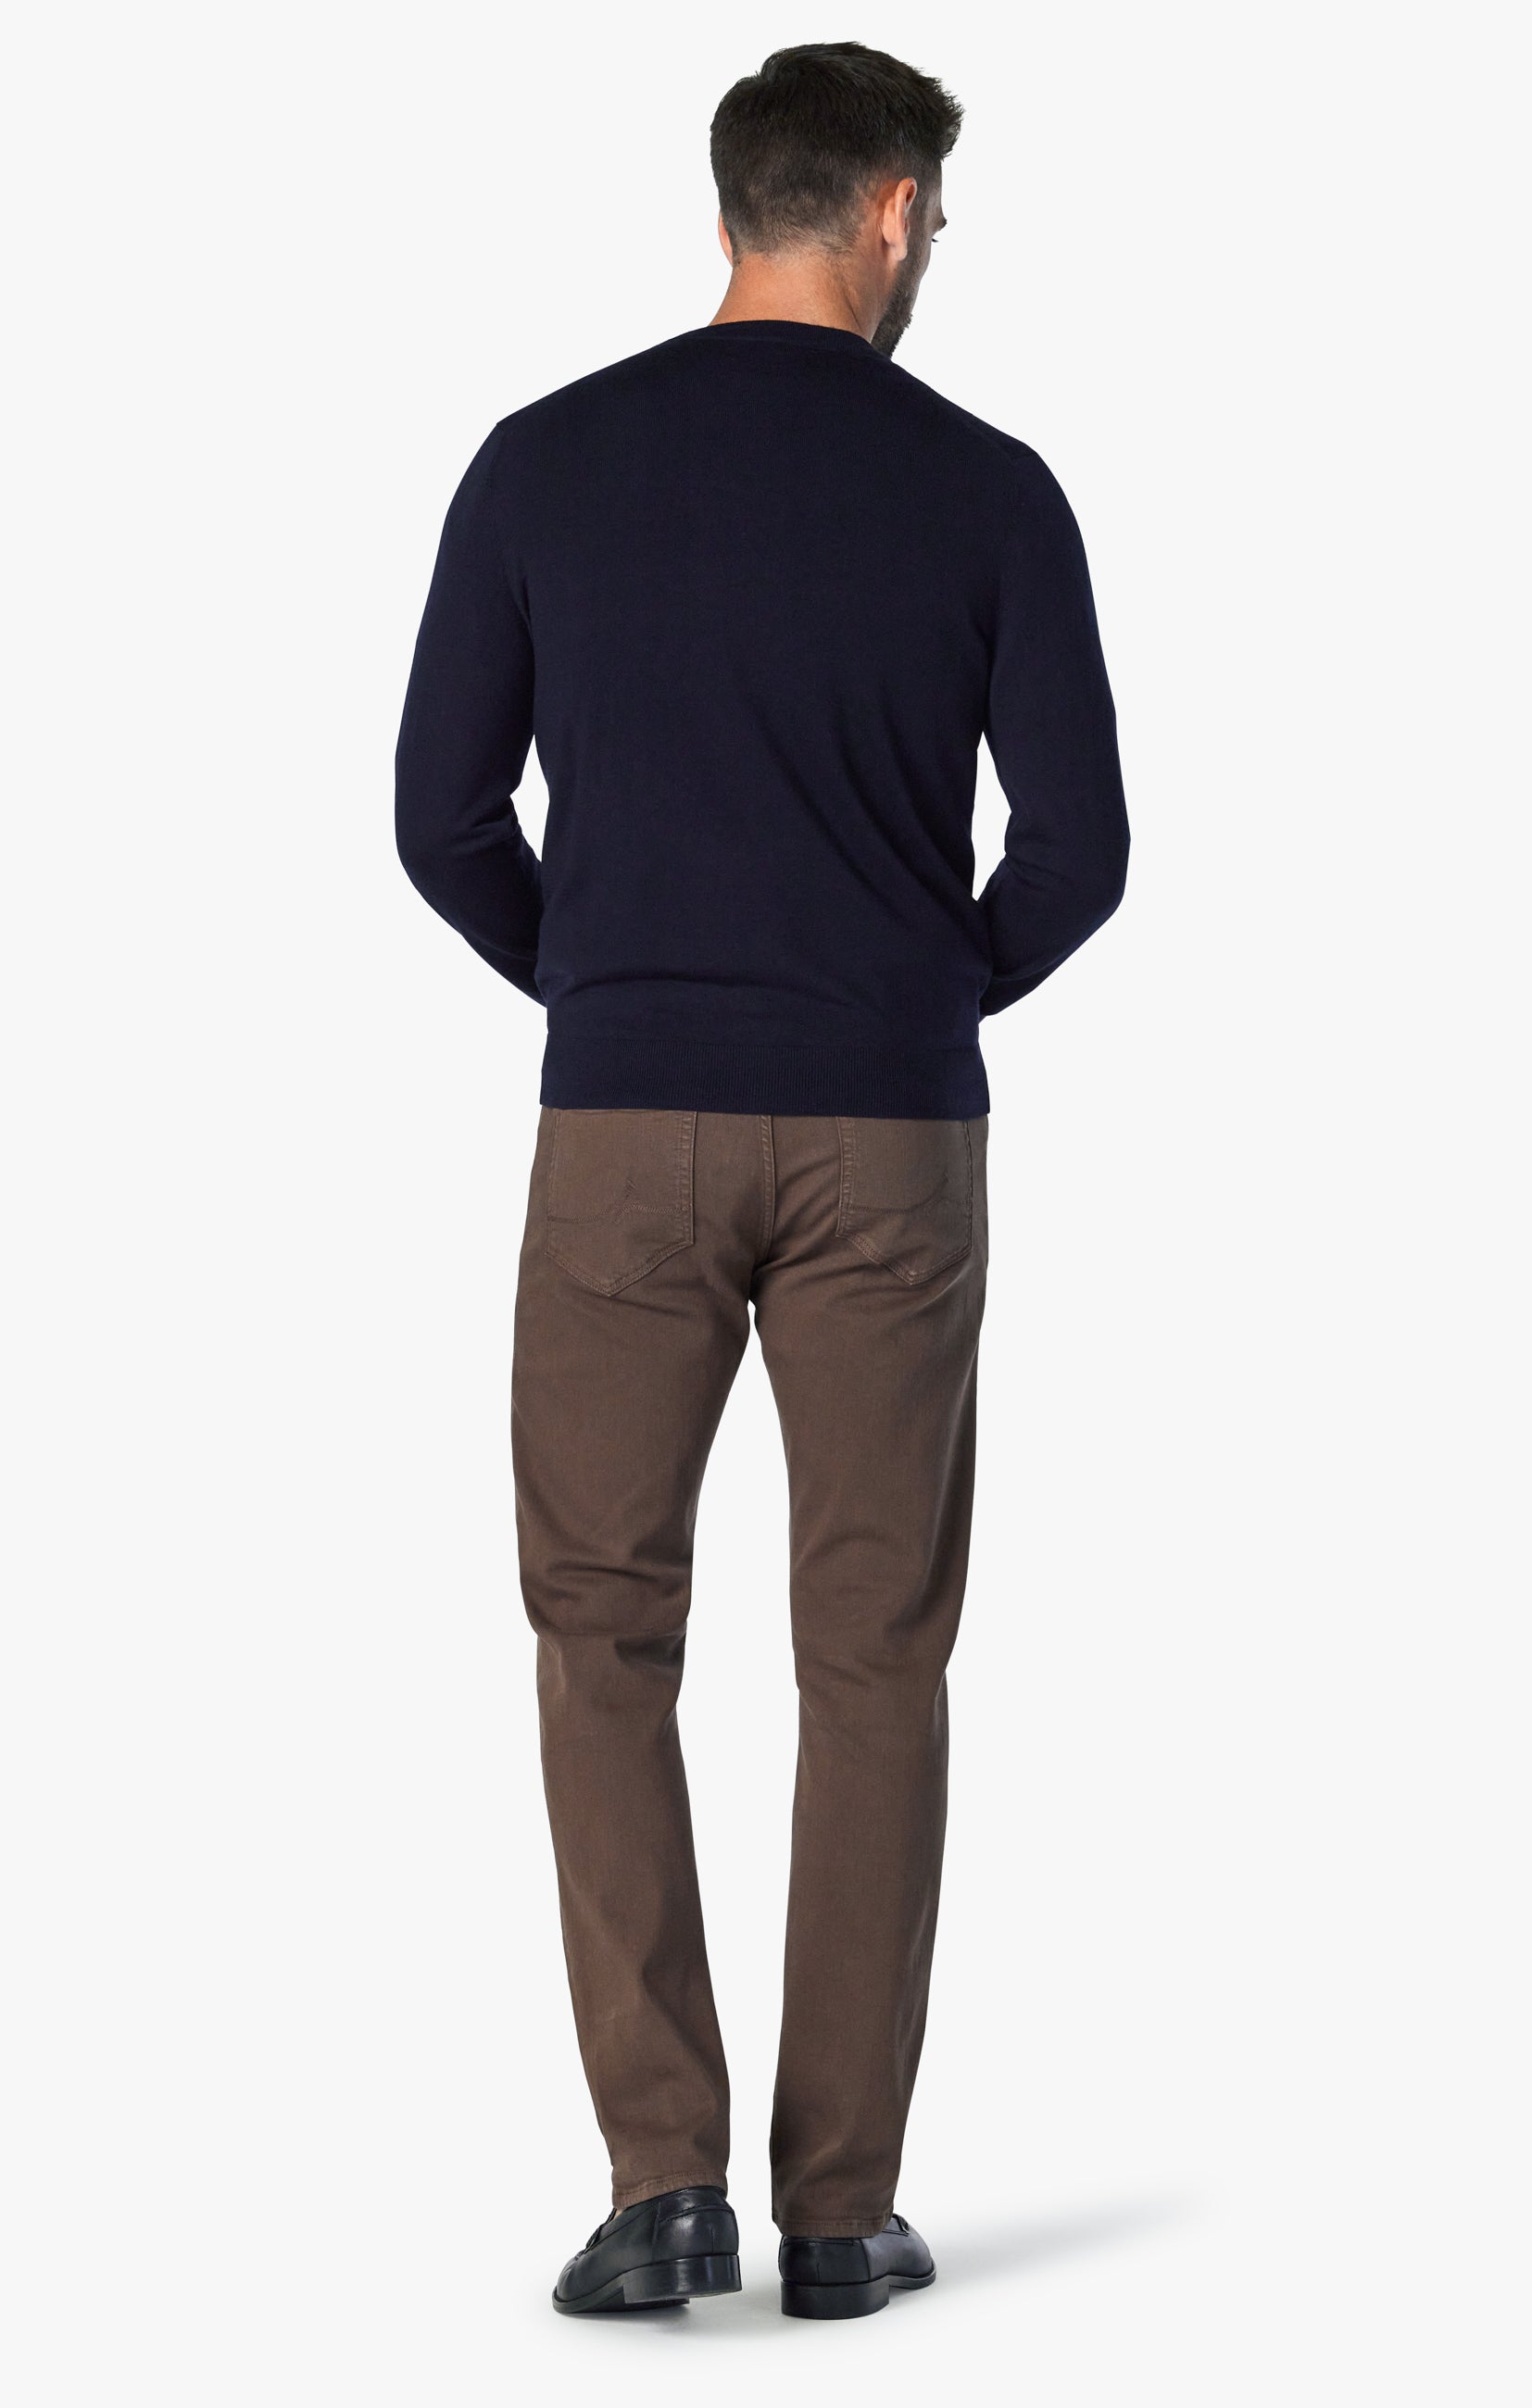 Charisma Classic Fit Pants in Cafe Comfort